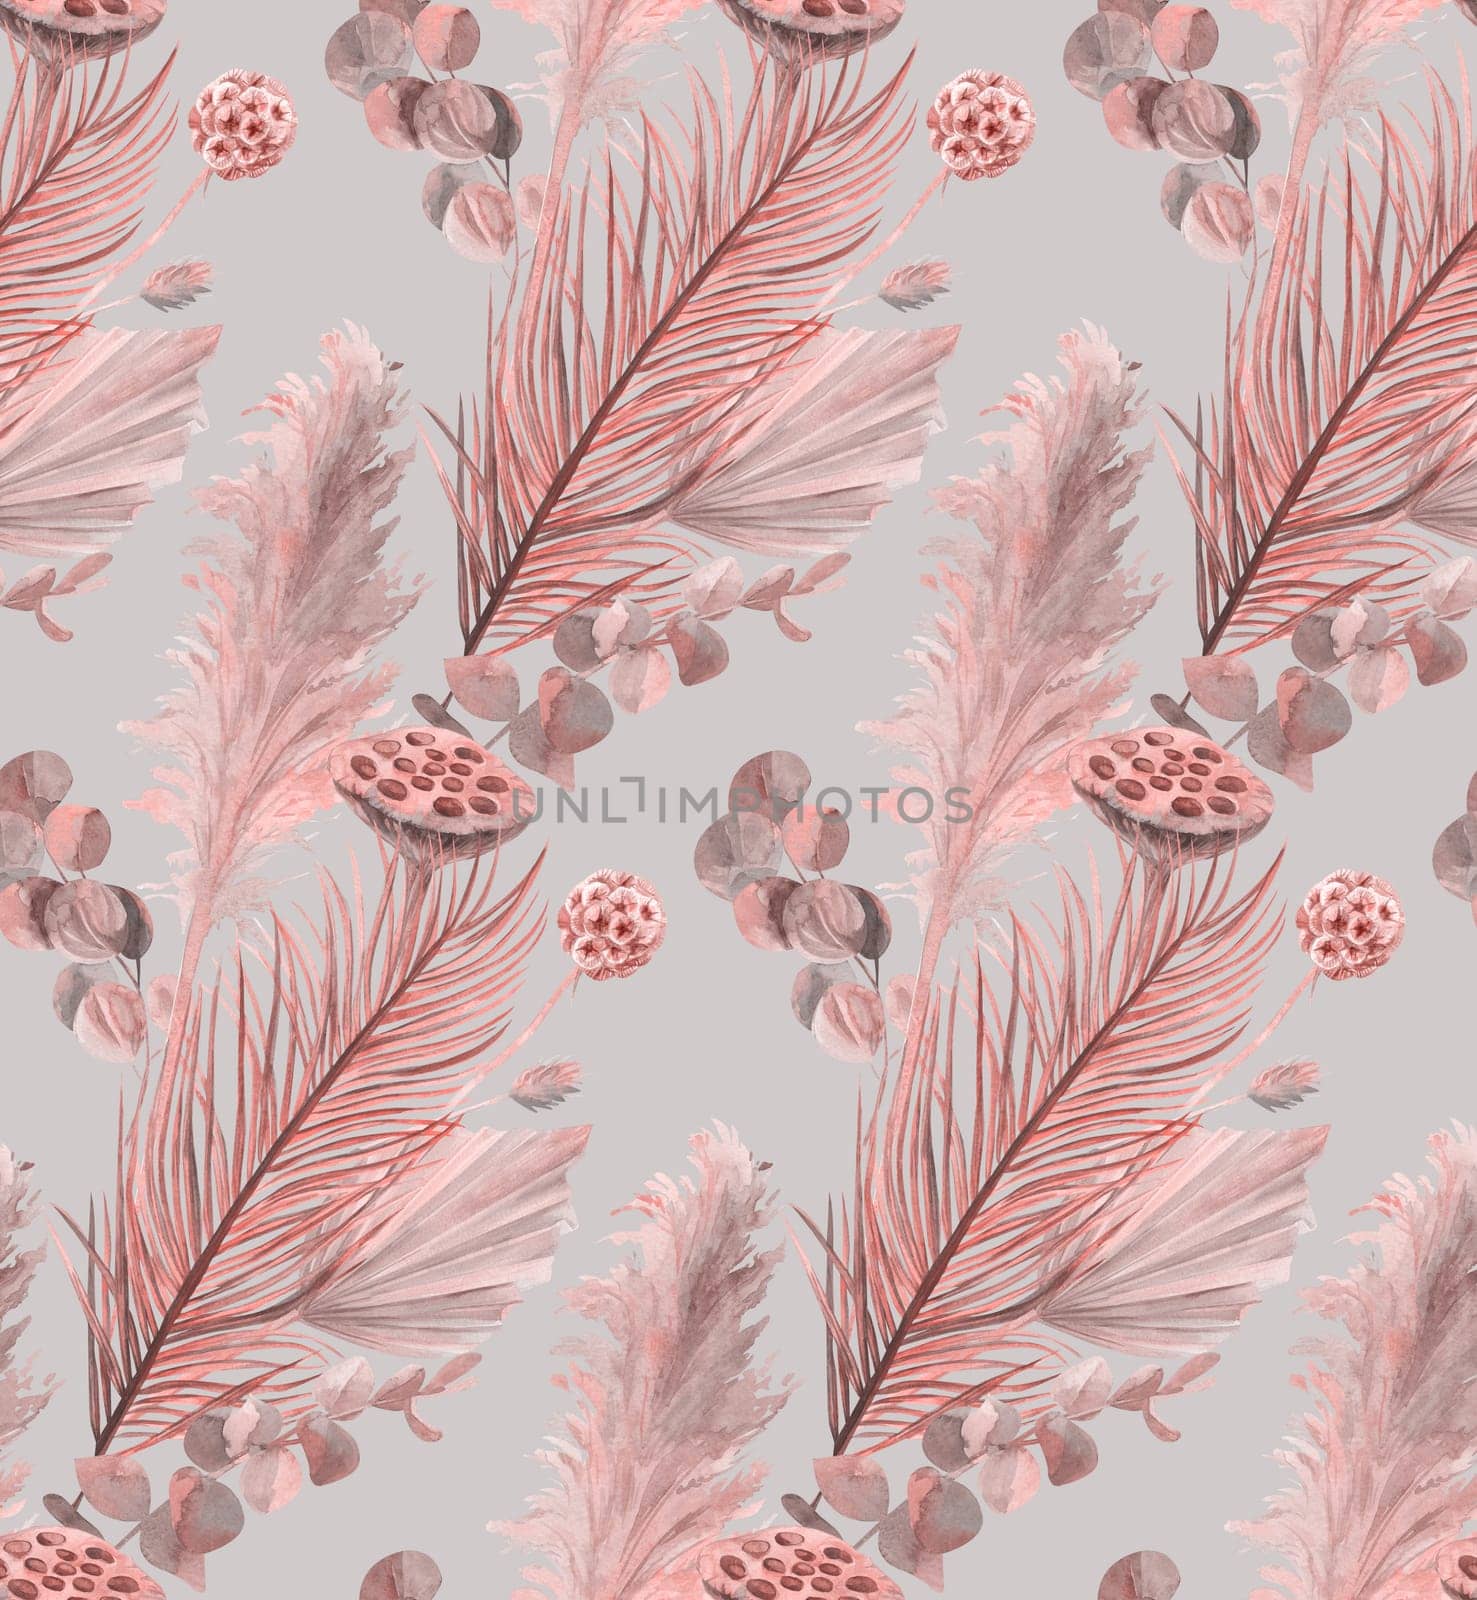 monochrome seamless watercolor pattern with dried flowers and dry palm leaves on gray background for textiles and surface design